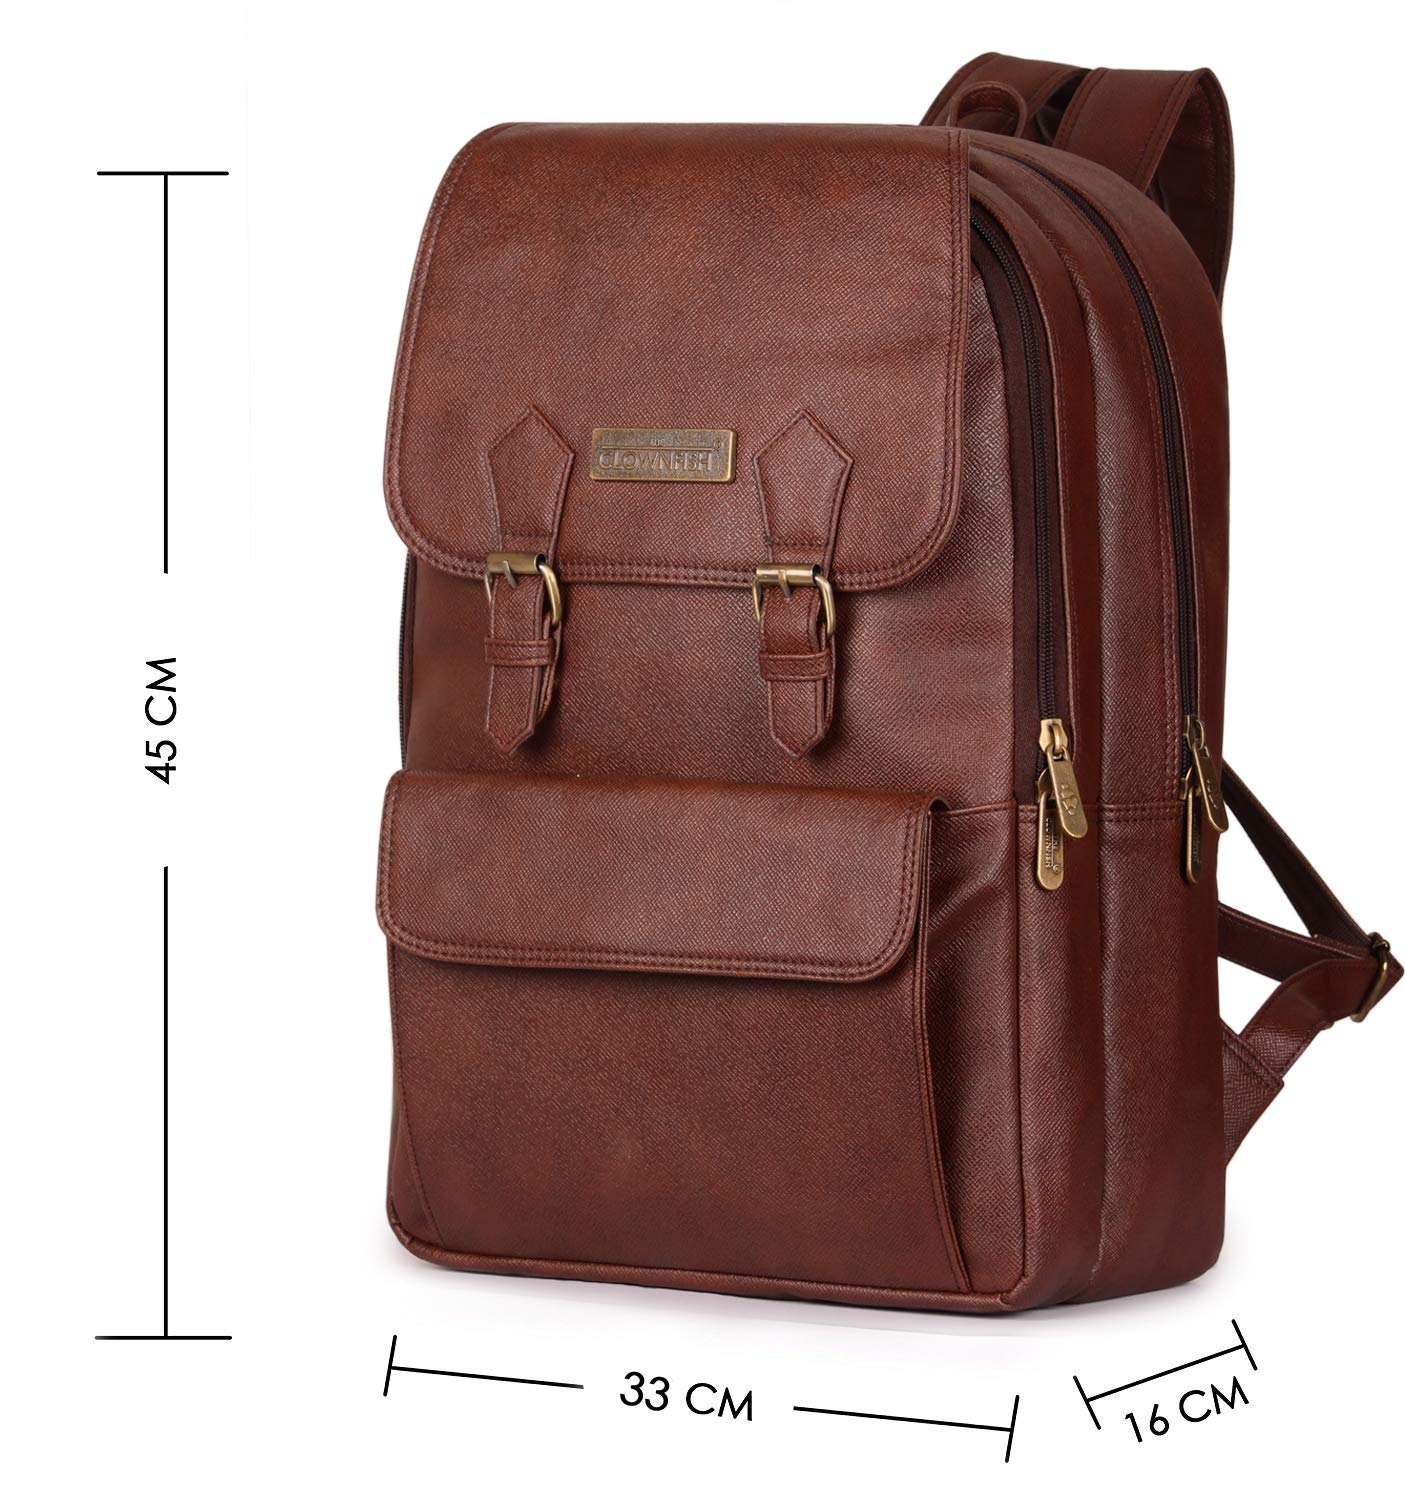 THE CLOWNFISH Hayden 15.6 Inch Laptop Backpack for Men and Women - Brown